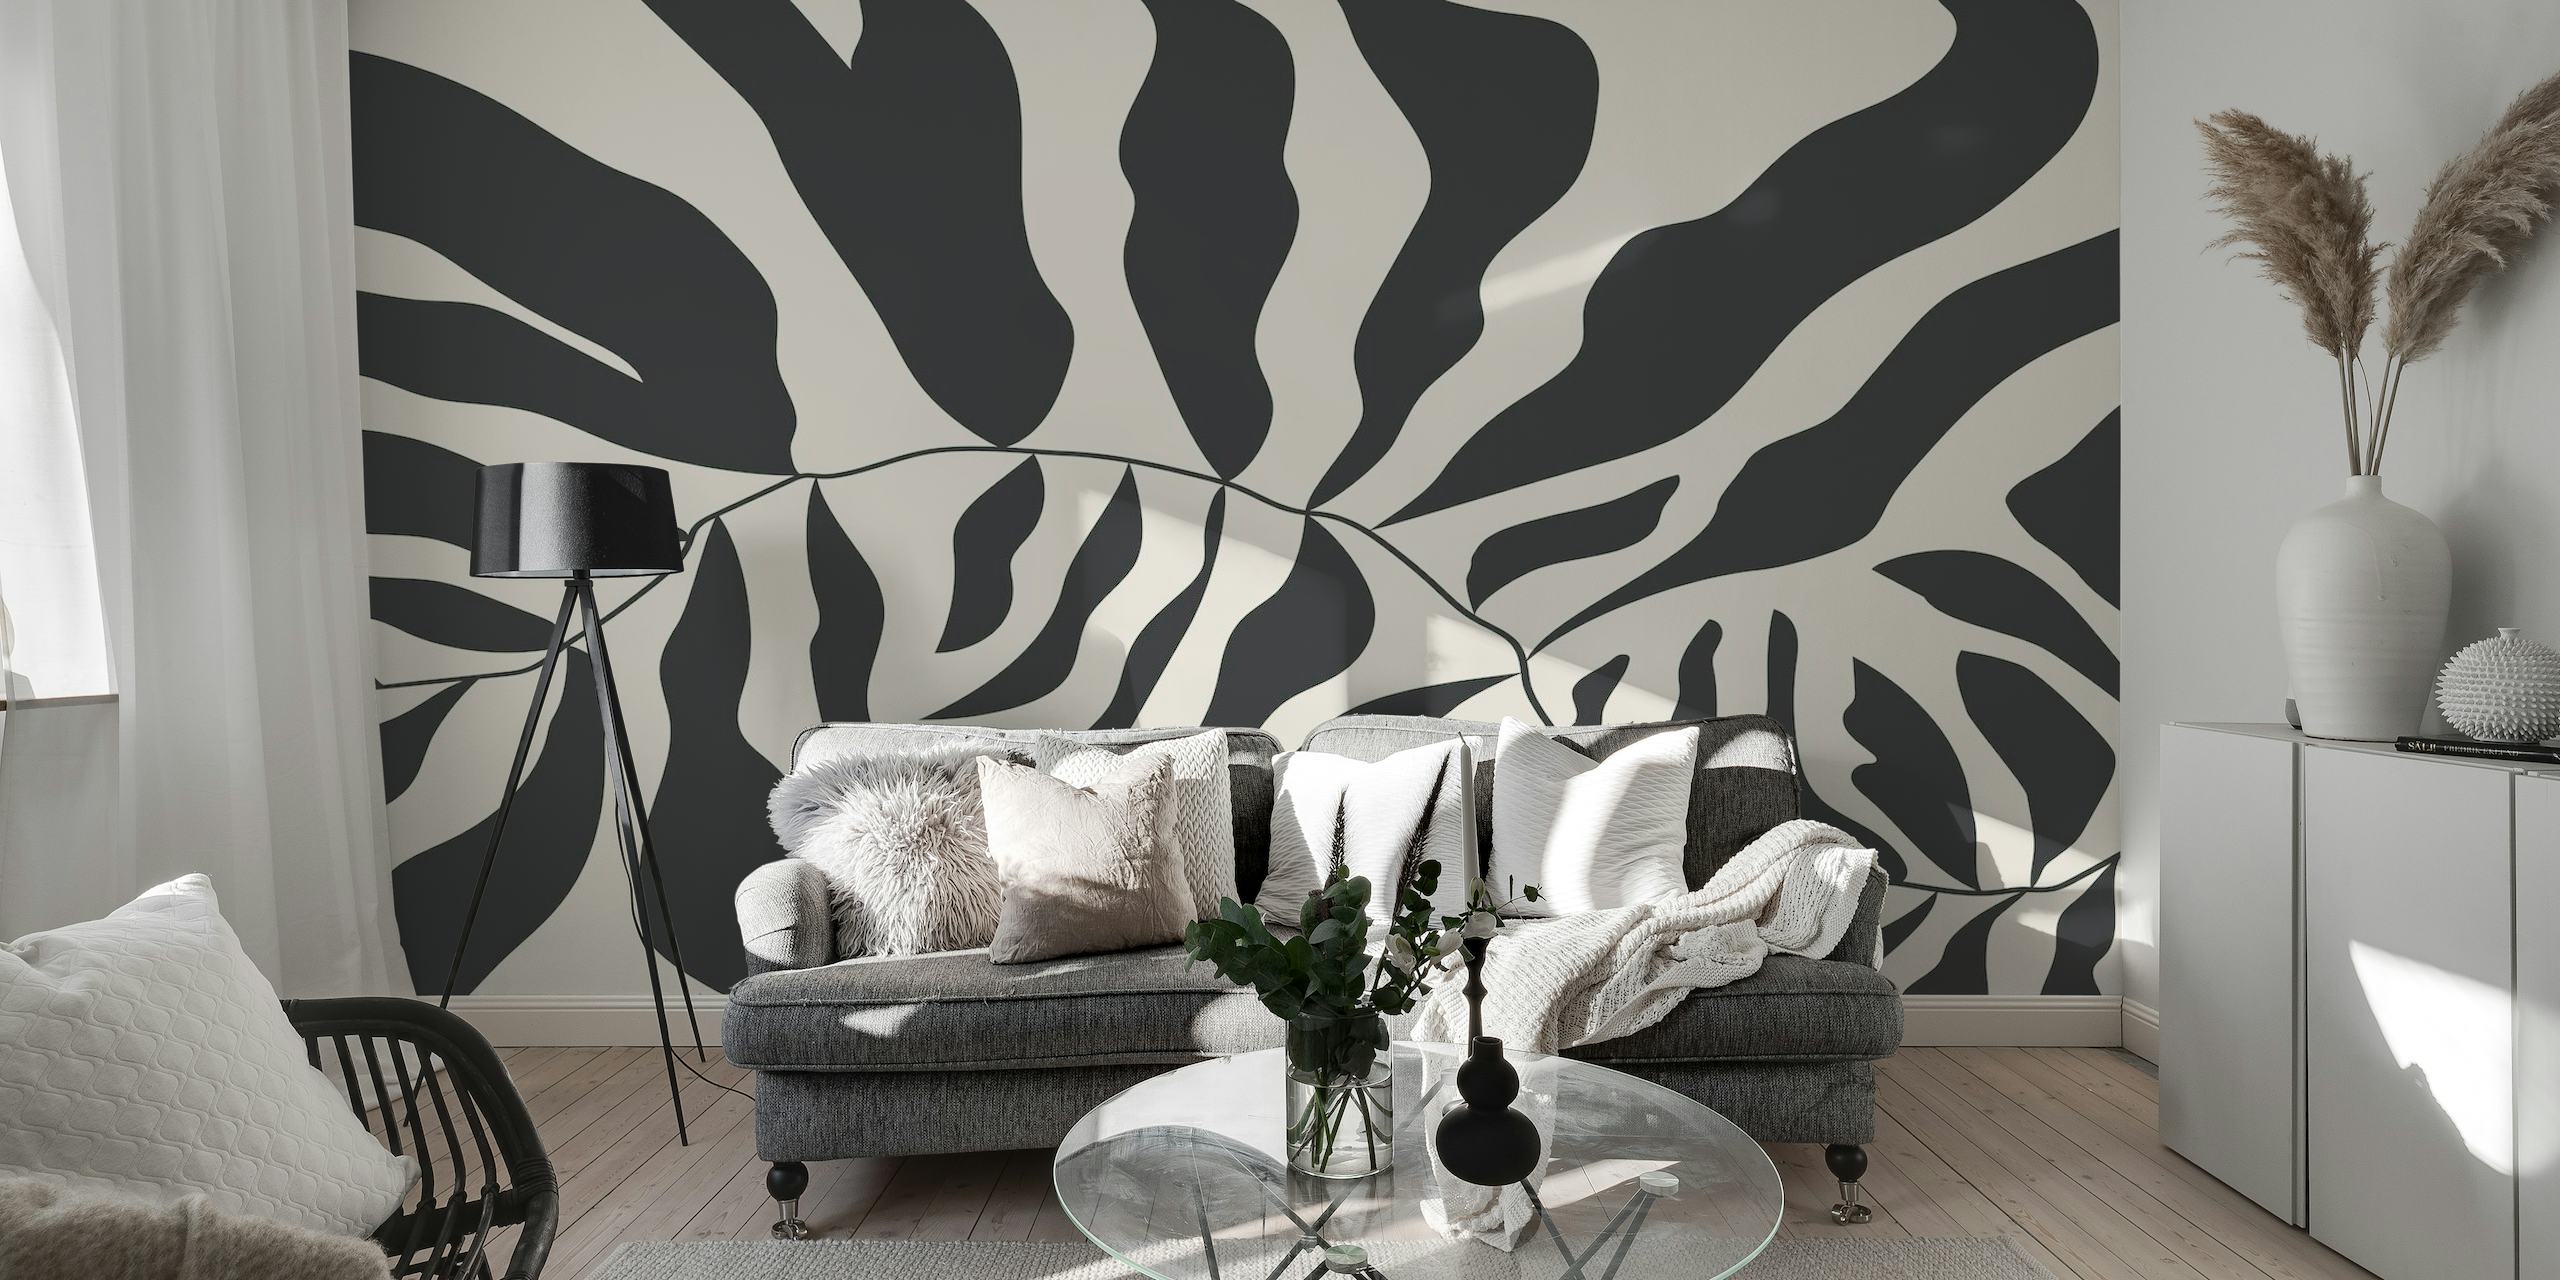 Black and white abstract Matisse-style wall mural depicting organic shapes